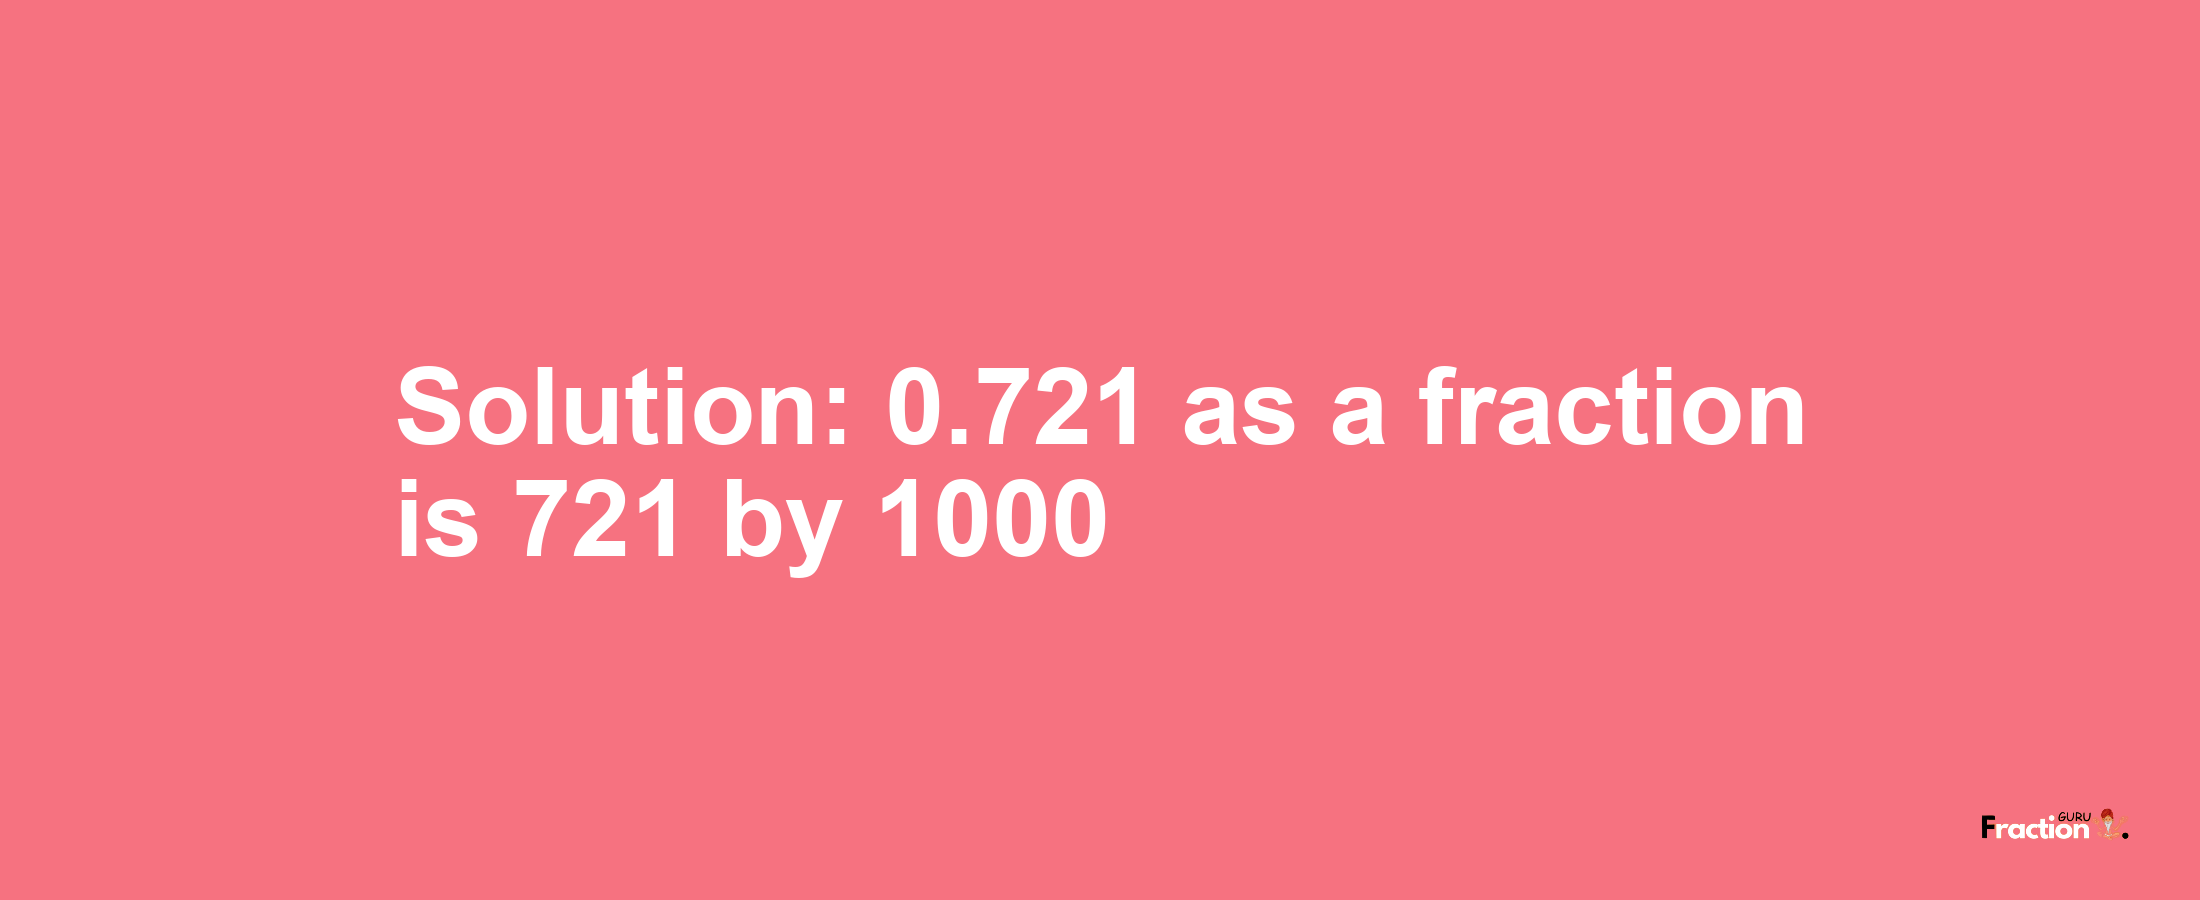 Solution:0.721 as a fraction is 721/1000